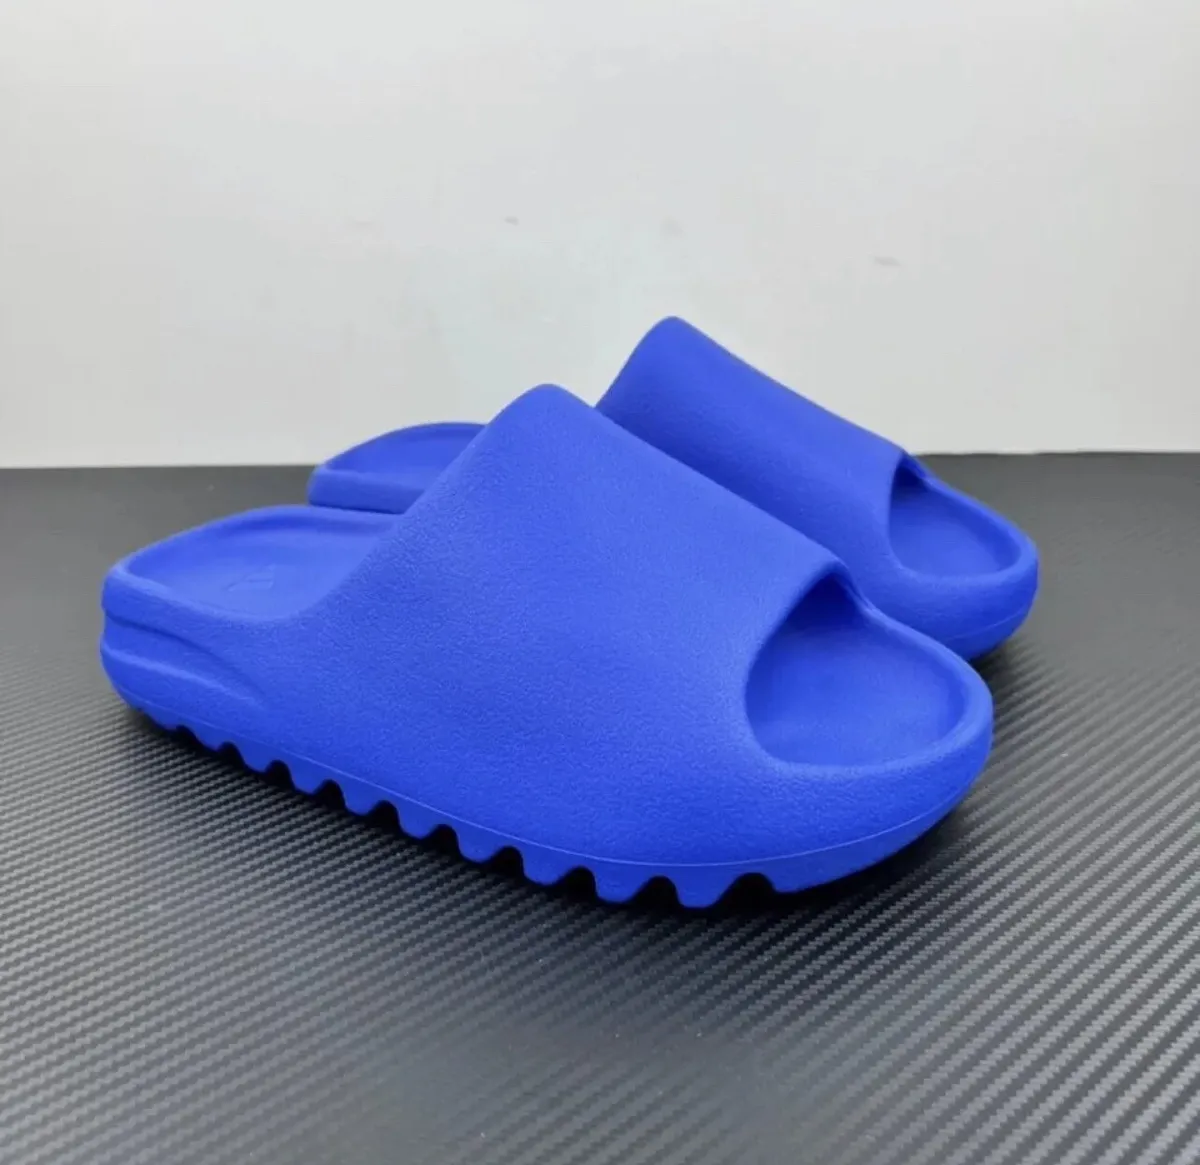 Adidas Yeezy Slide Azure Size 10 Brand New In Box CONFIRMED